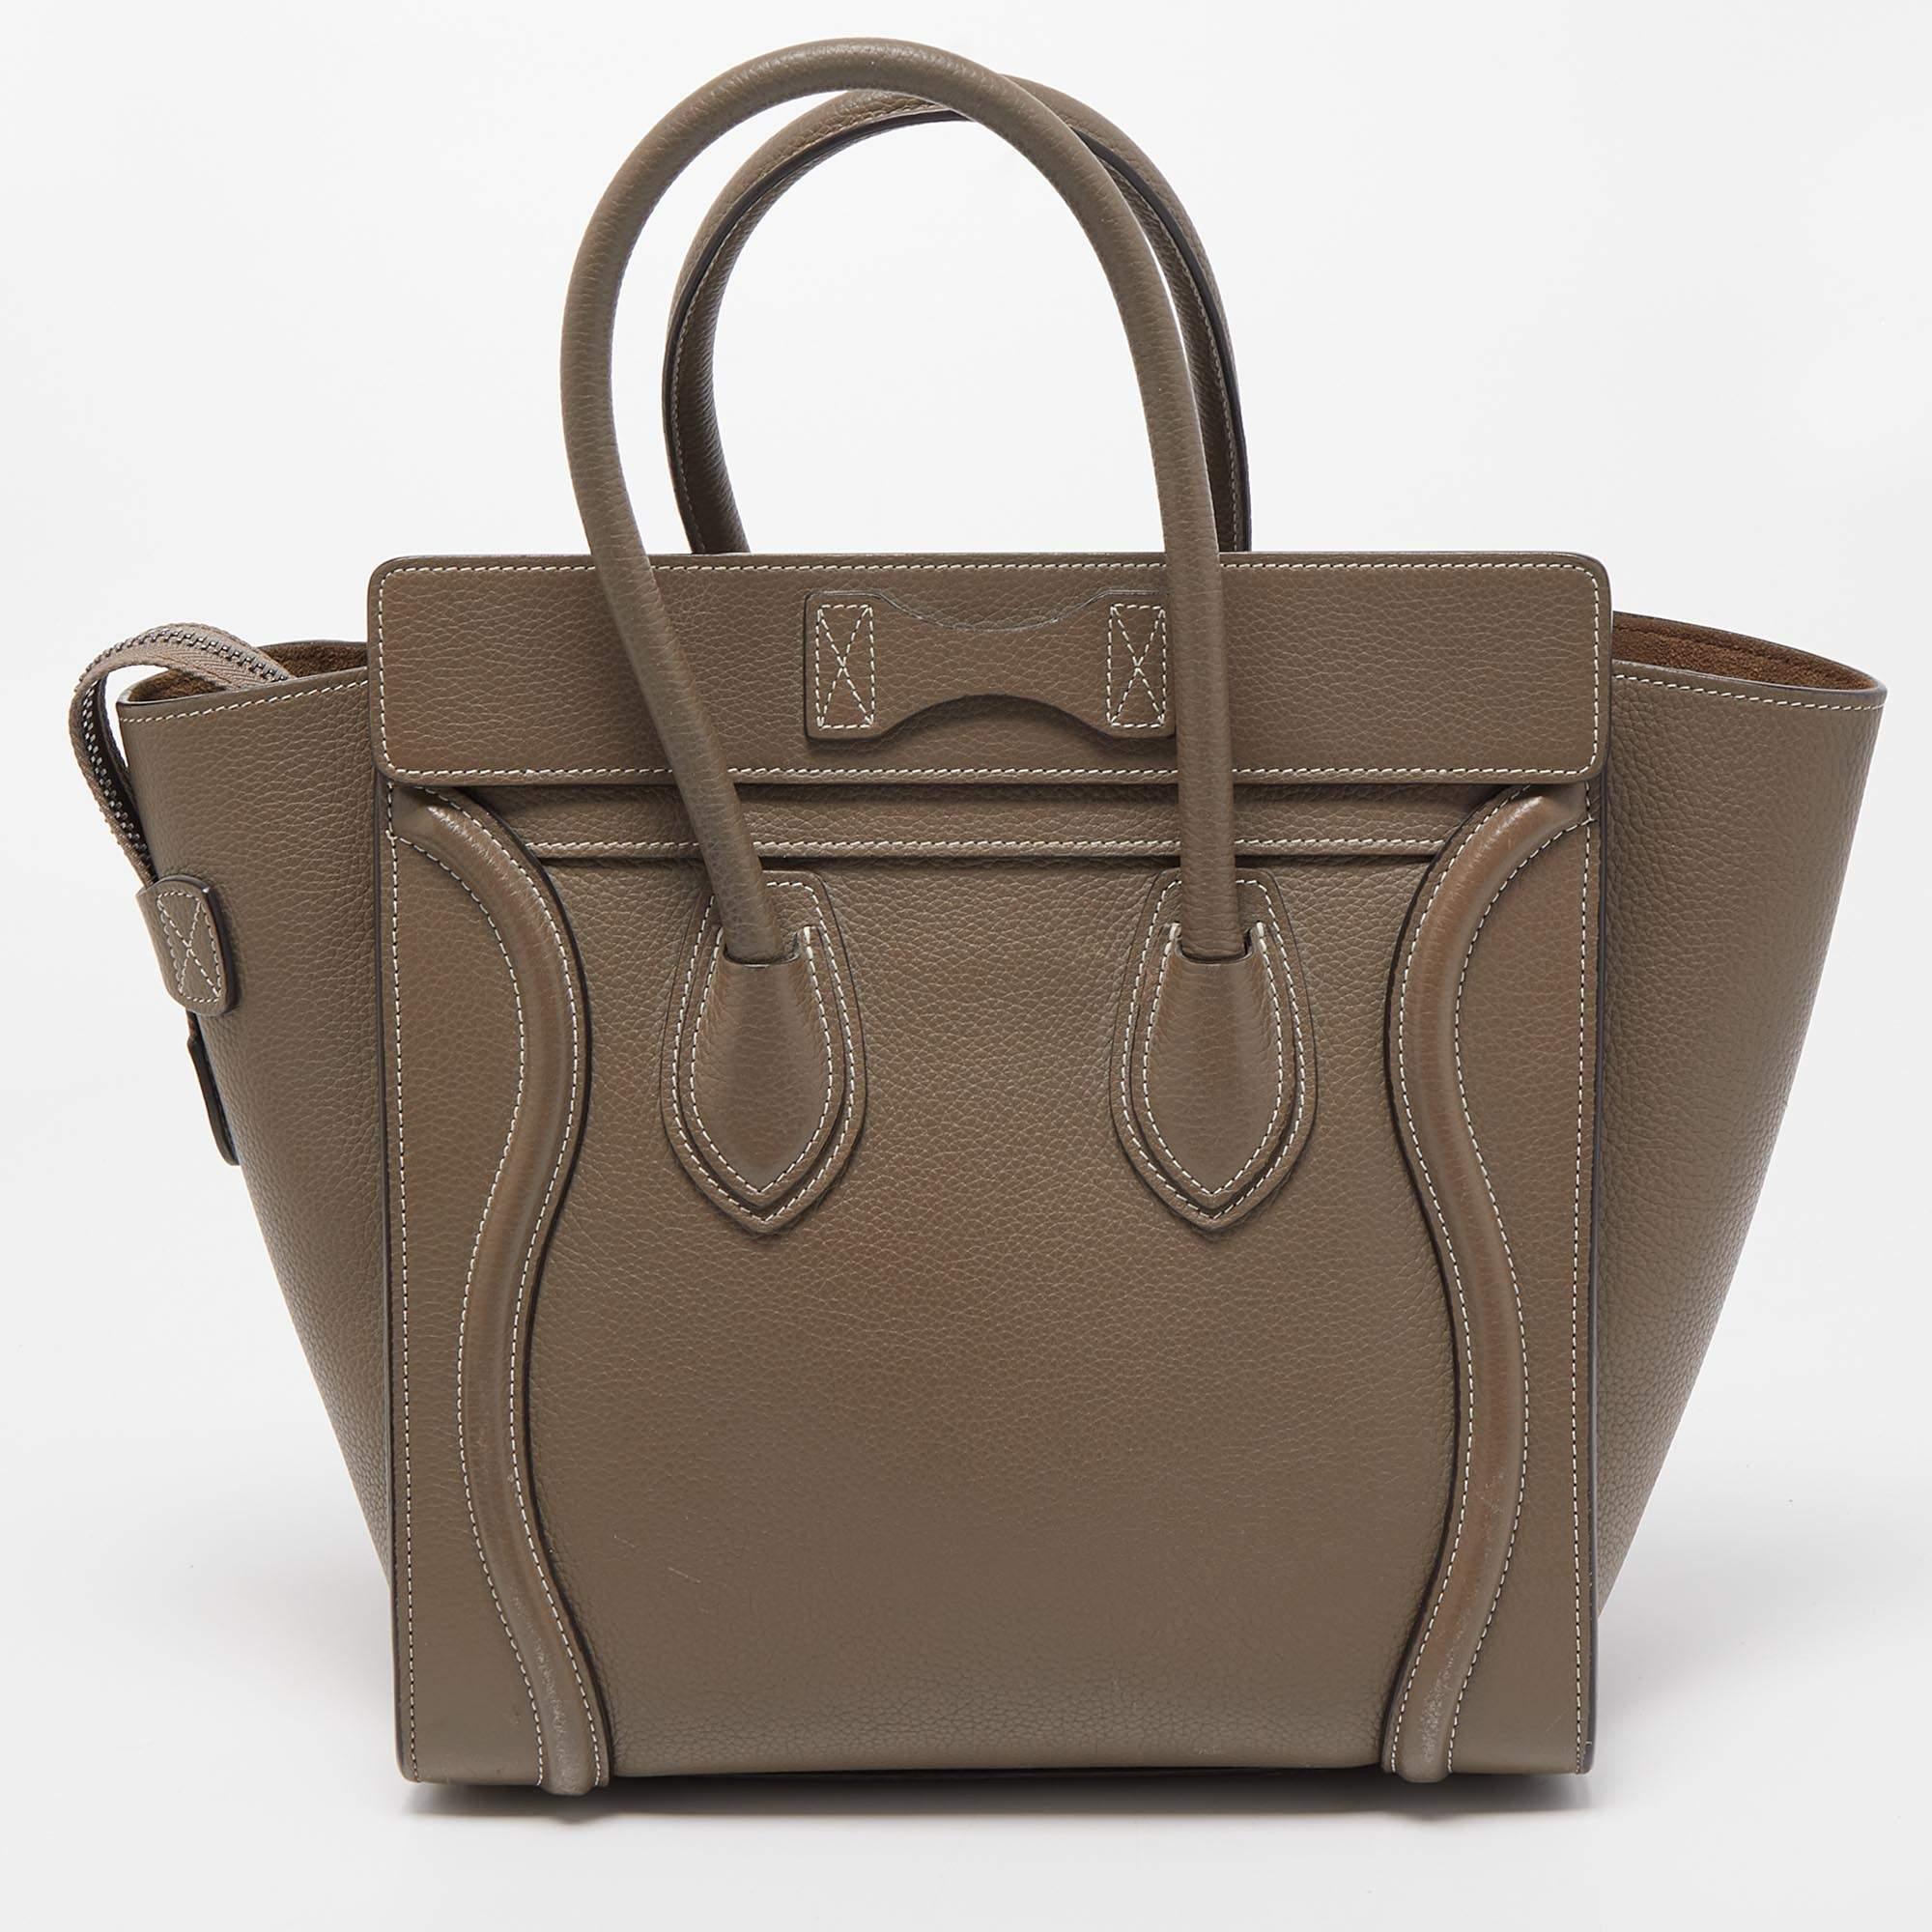 The Luggage tote from Celine is one of the most popular handbags in the world. This tote is crafted from leather and designed in a grey hue. It comes with rolled top handles and a front zip pocket. The bag is equipped with a well-sized leather